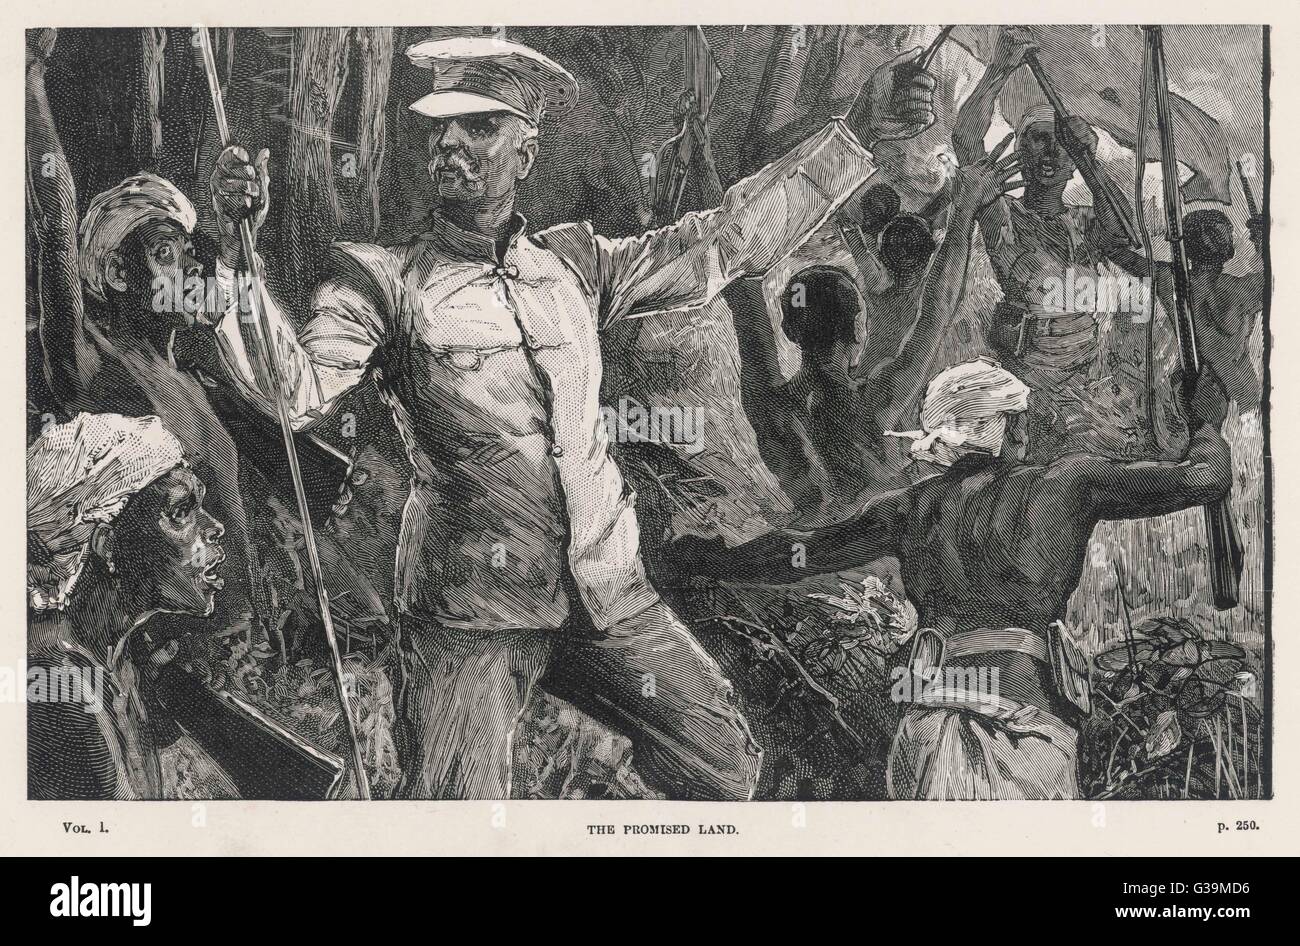 Emin Pasha relief expedition : He leads his force out of the  Congo jungle        Date: 1887 Stock Photo